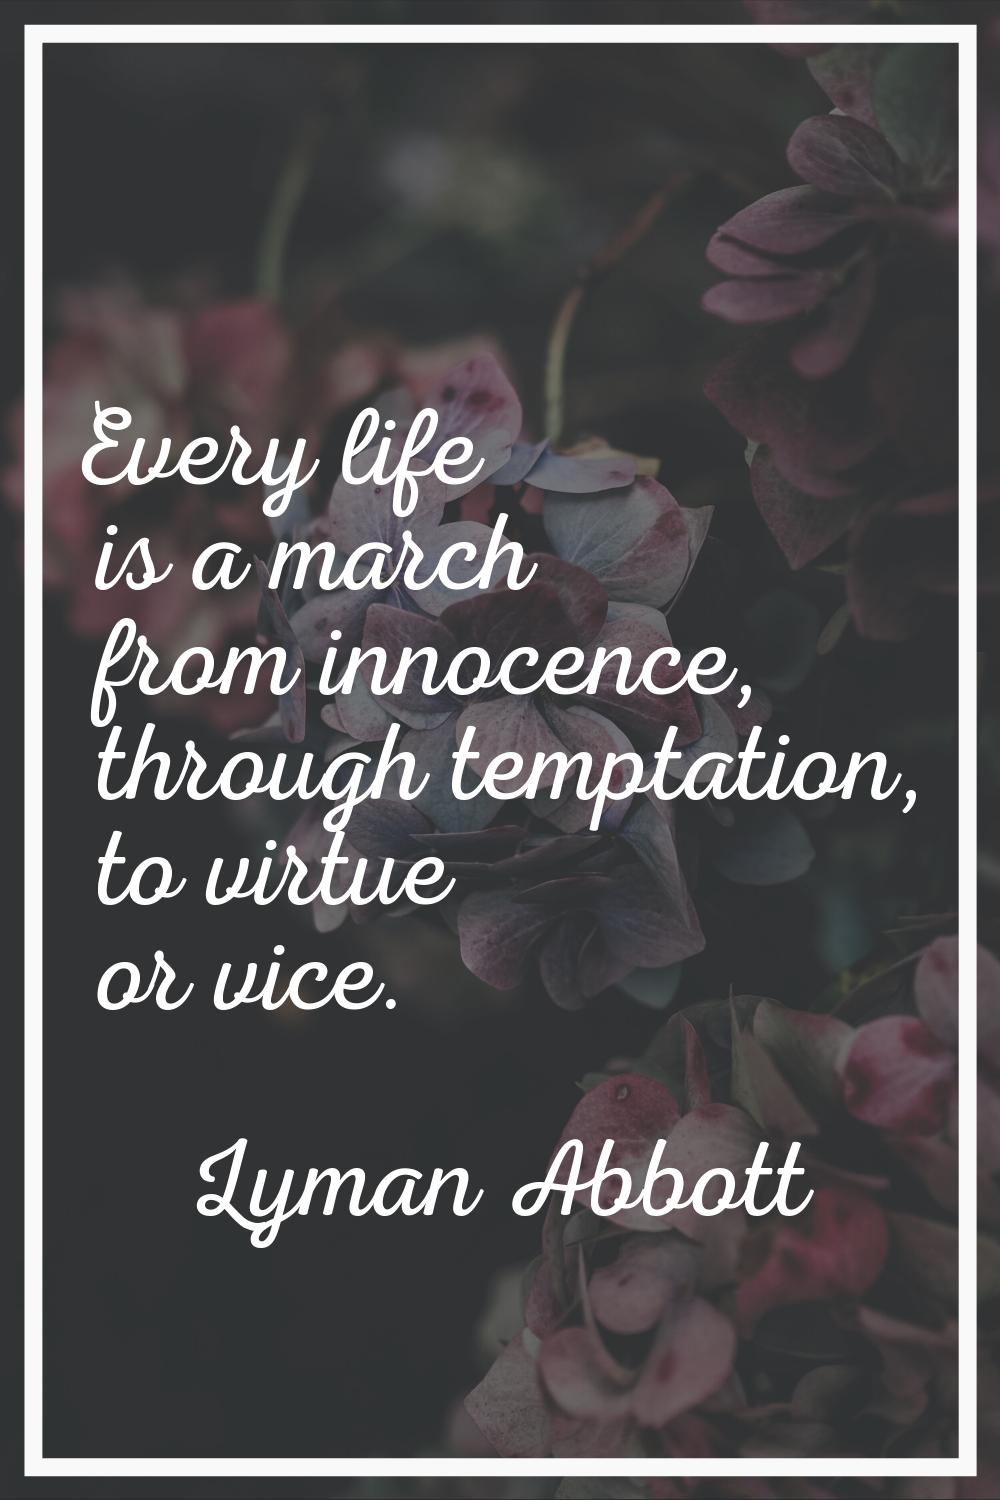 Every life is a march from innocence, through temptation, to virtue or vice.